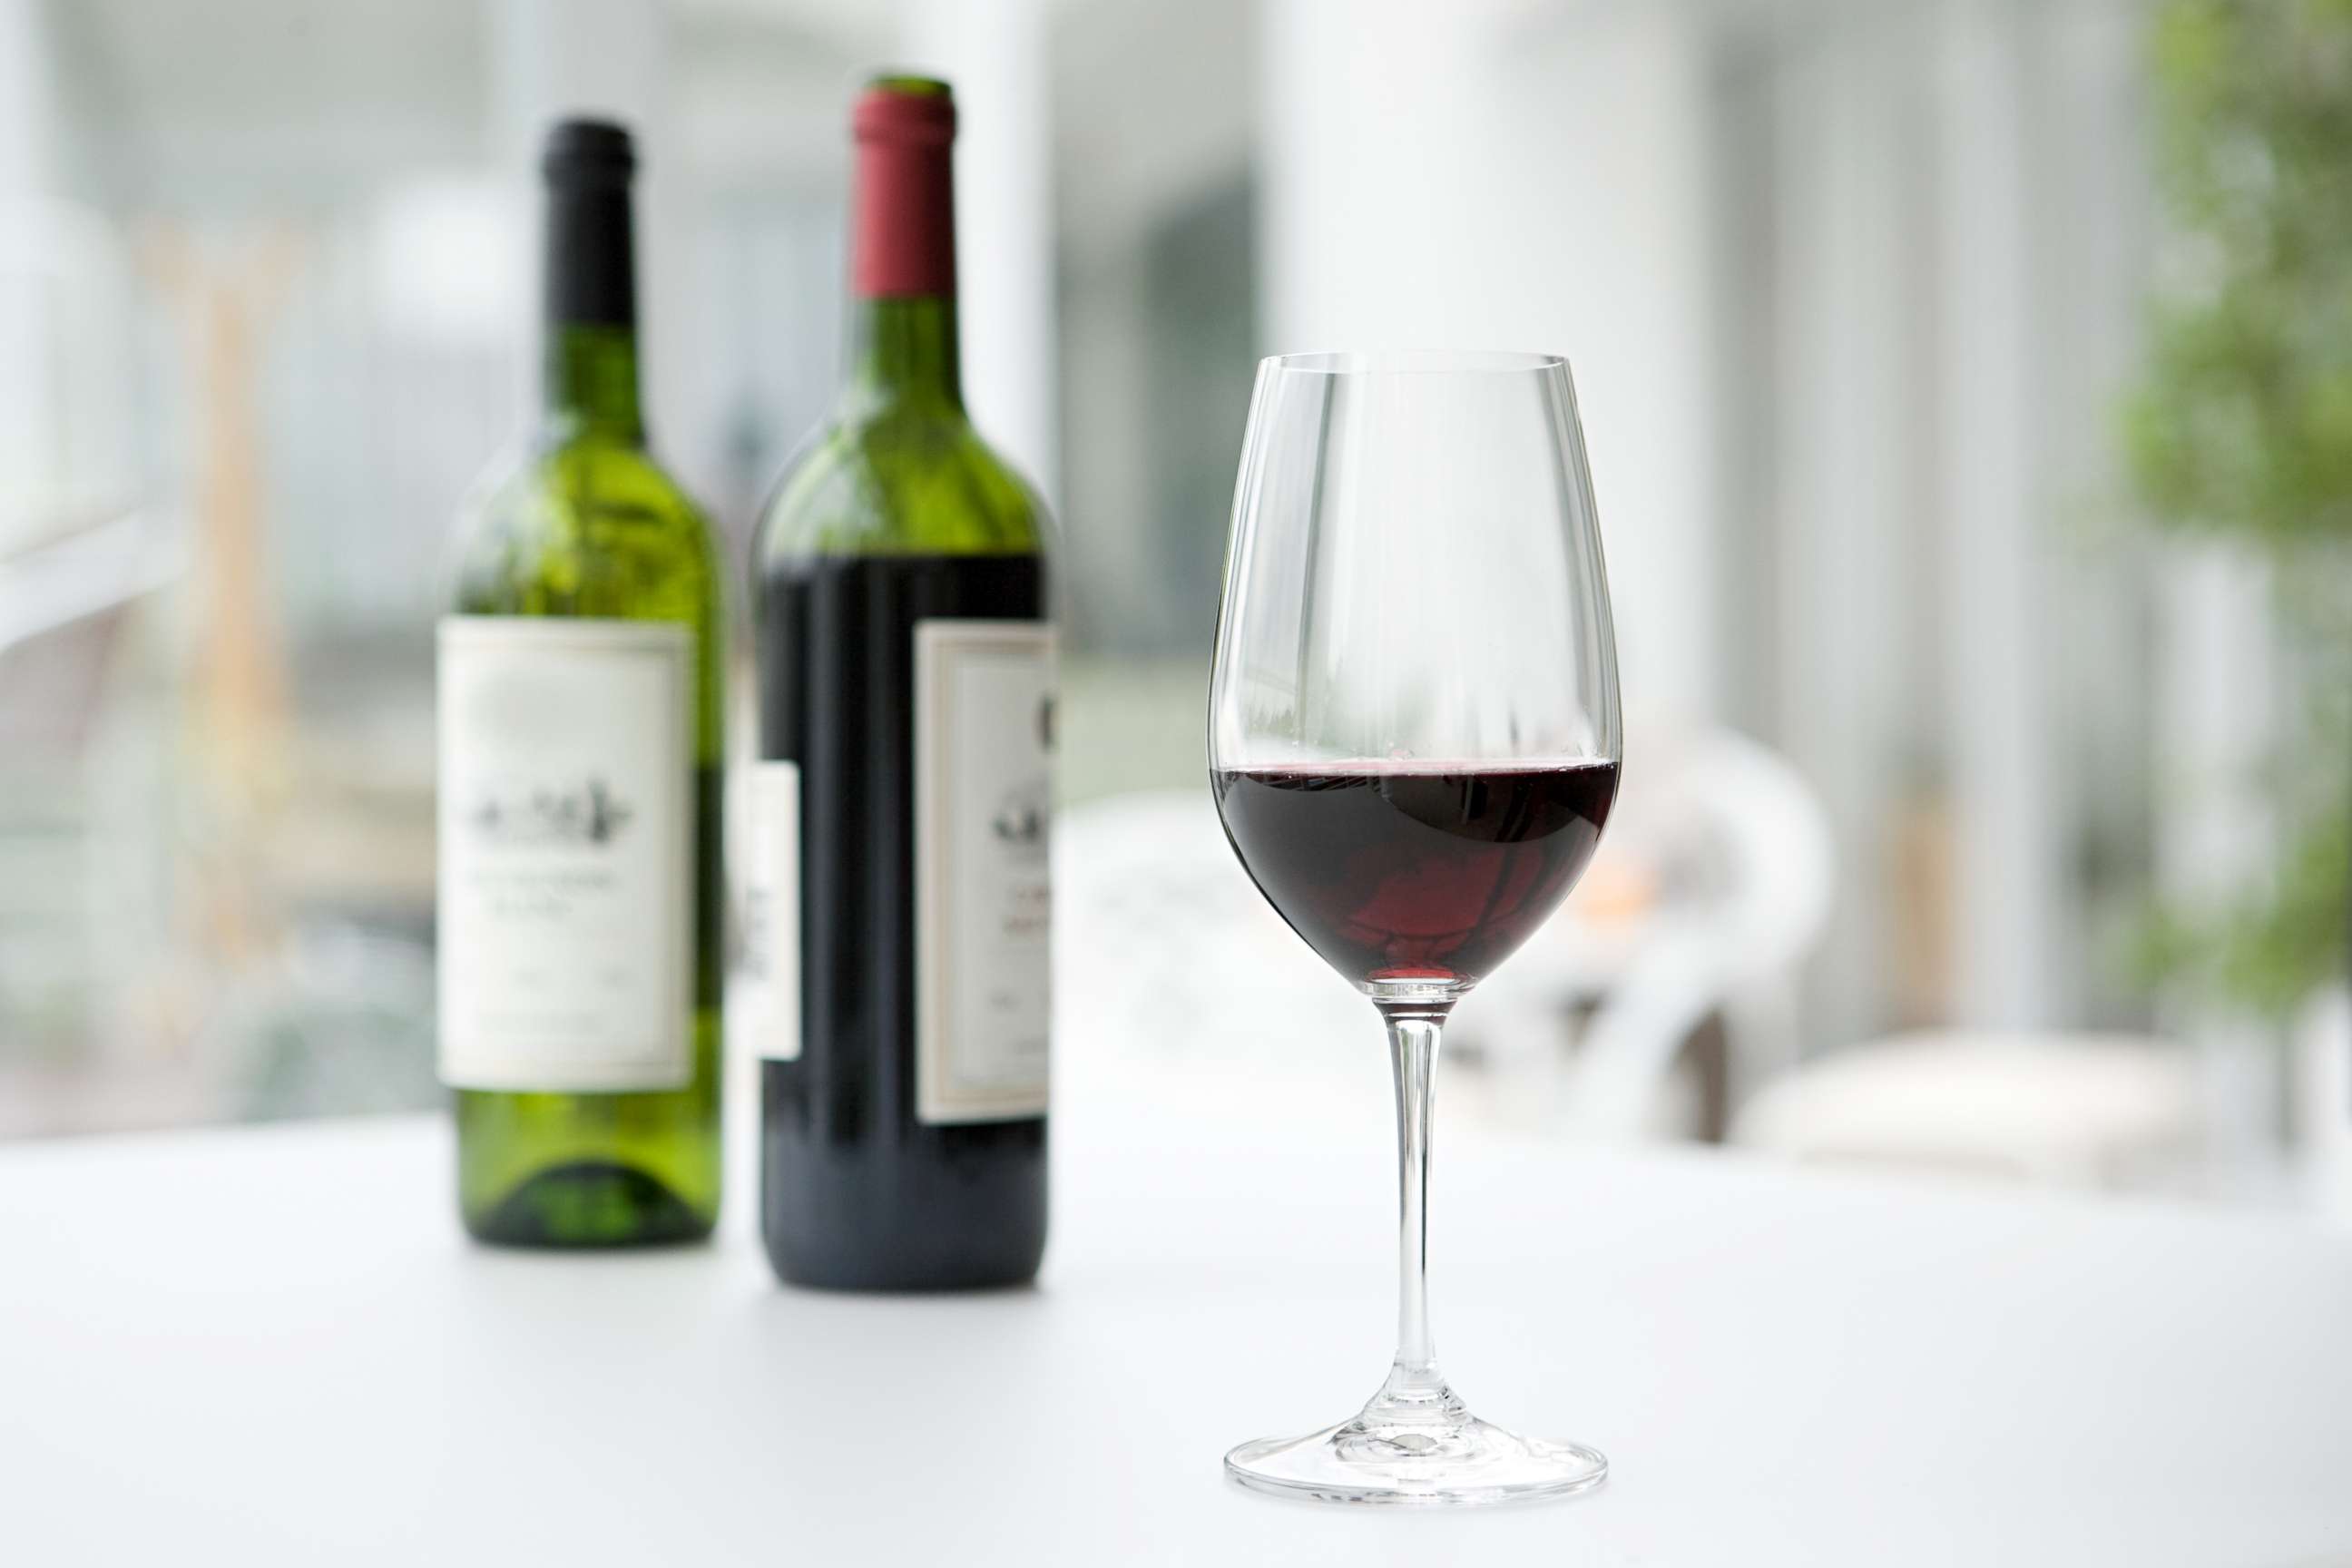 PHOTO: In this undated stock photo is a glass of red wine in front of bottles of wine.